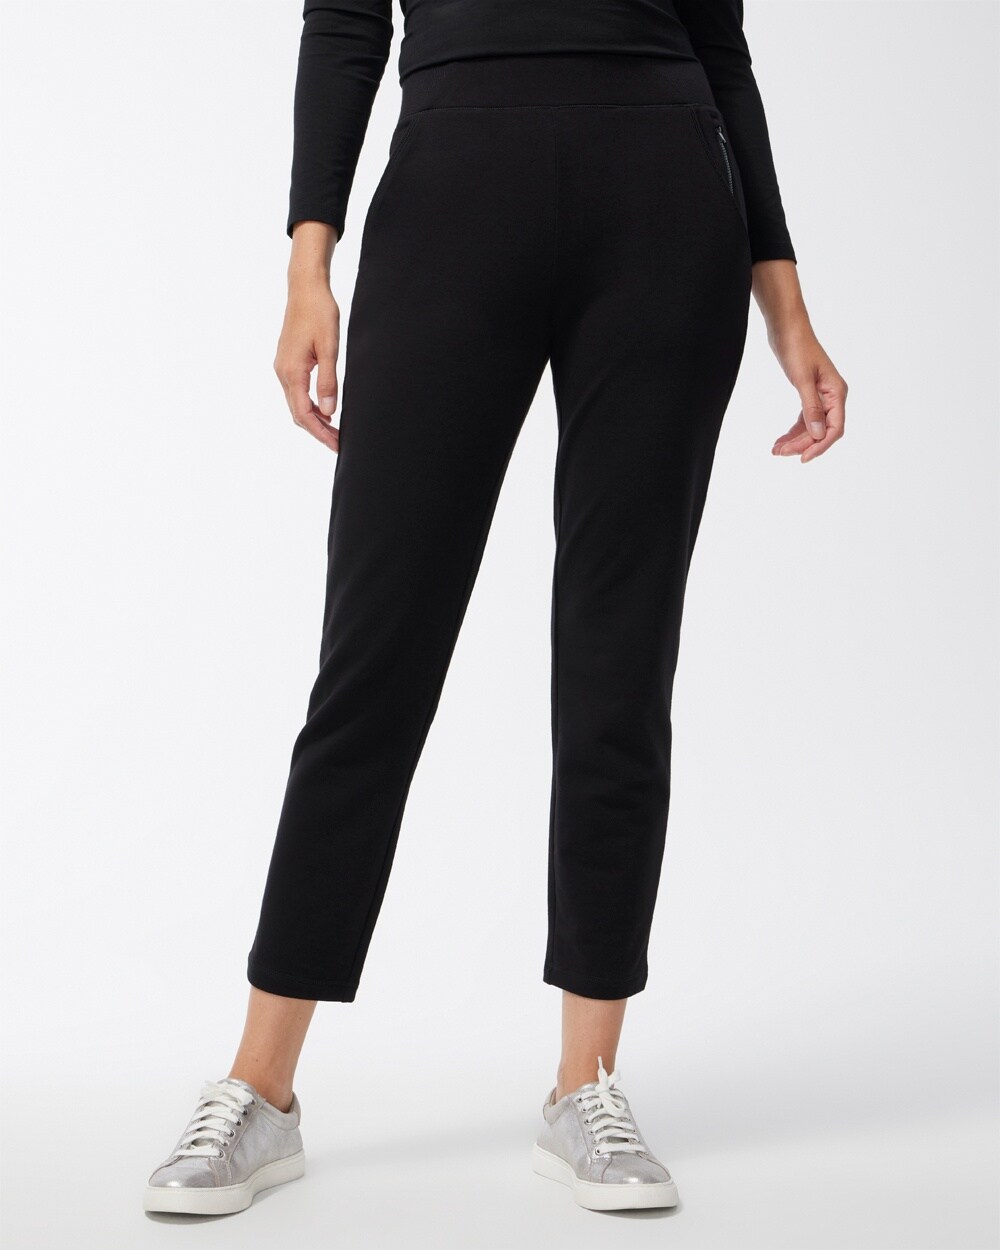 Zenergy French Terry Ankle Pants